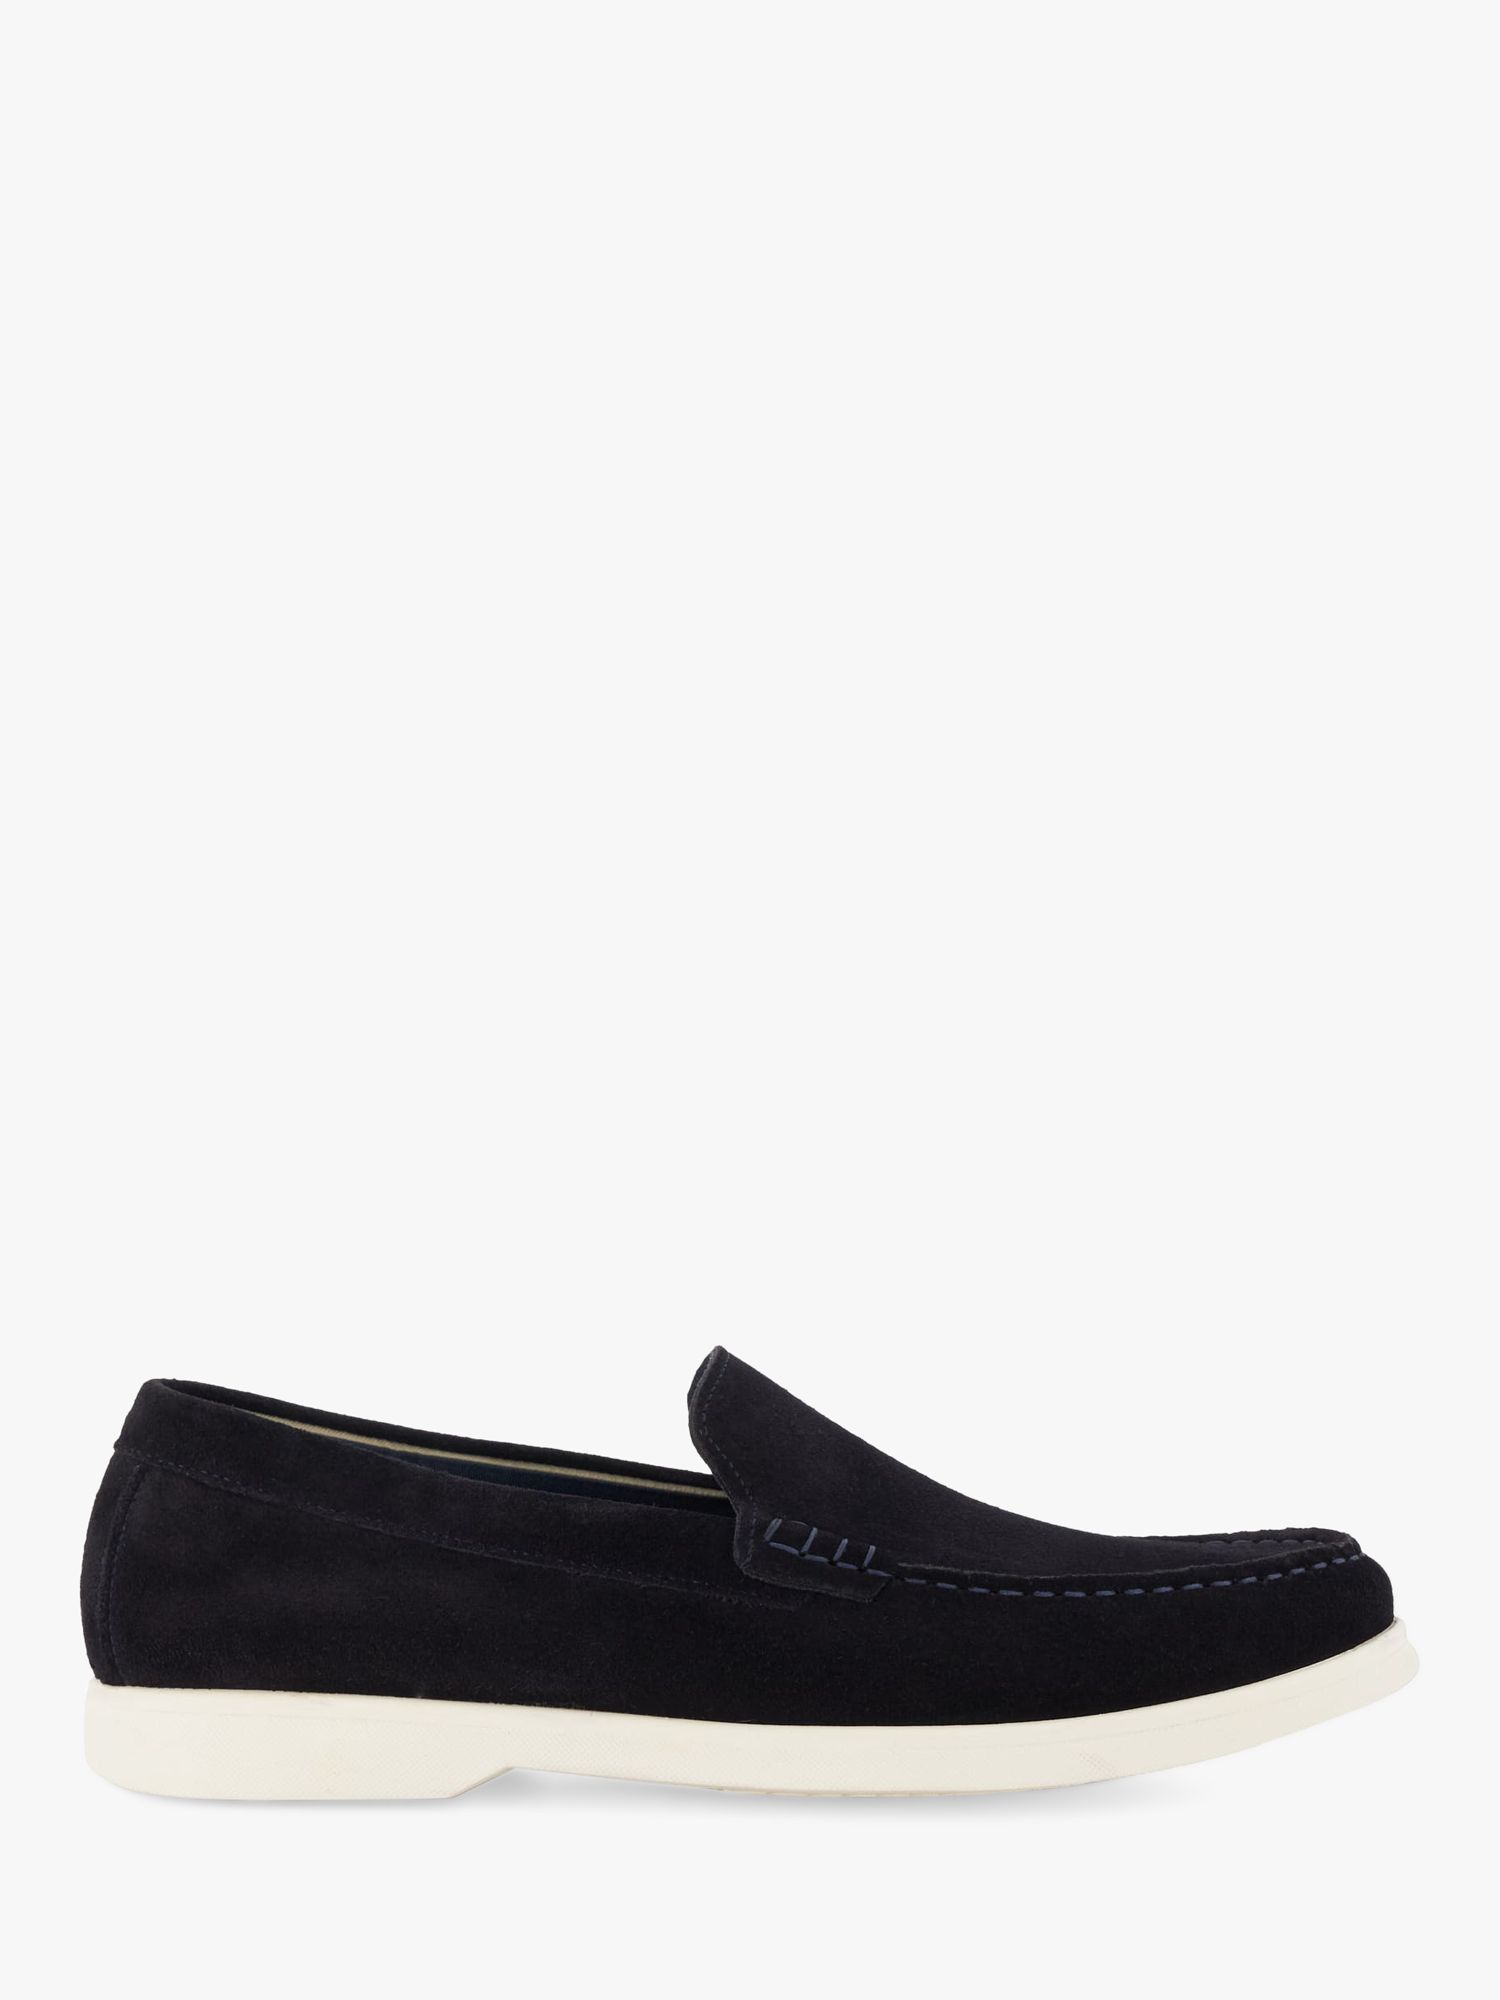 Dune Buftonn Casual Suede Loafers, Navy at John Lewis & Partners